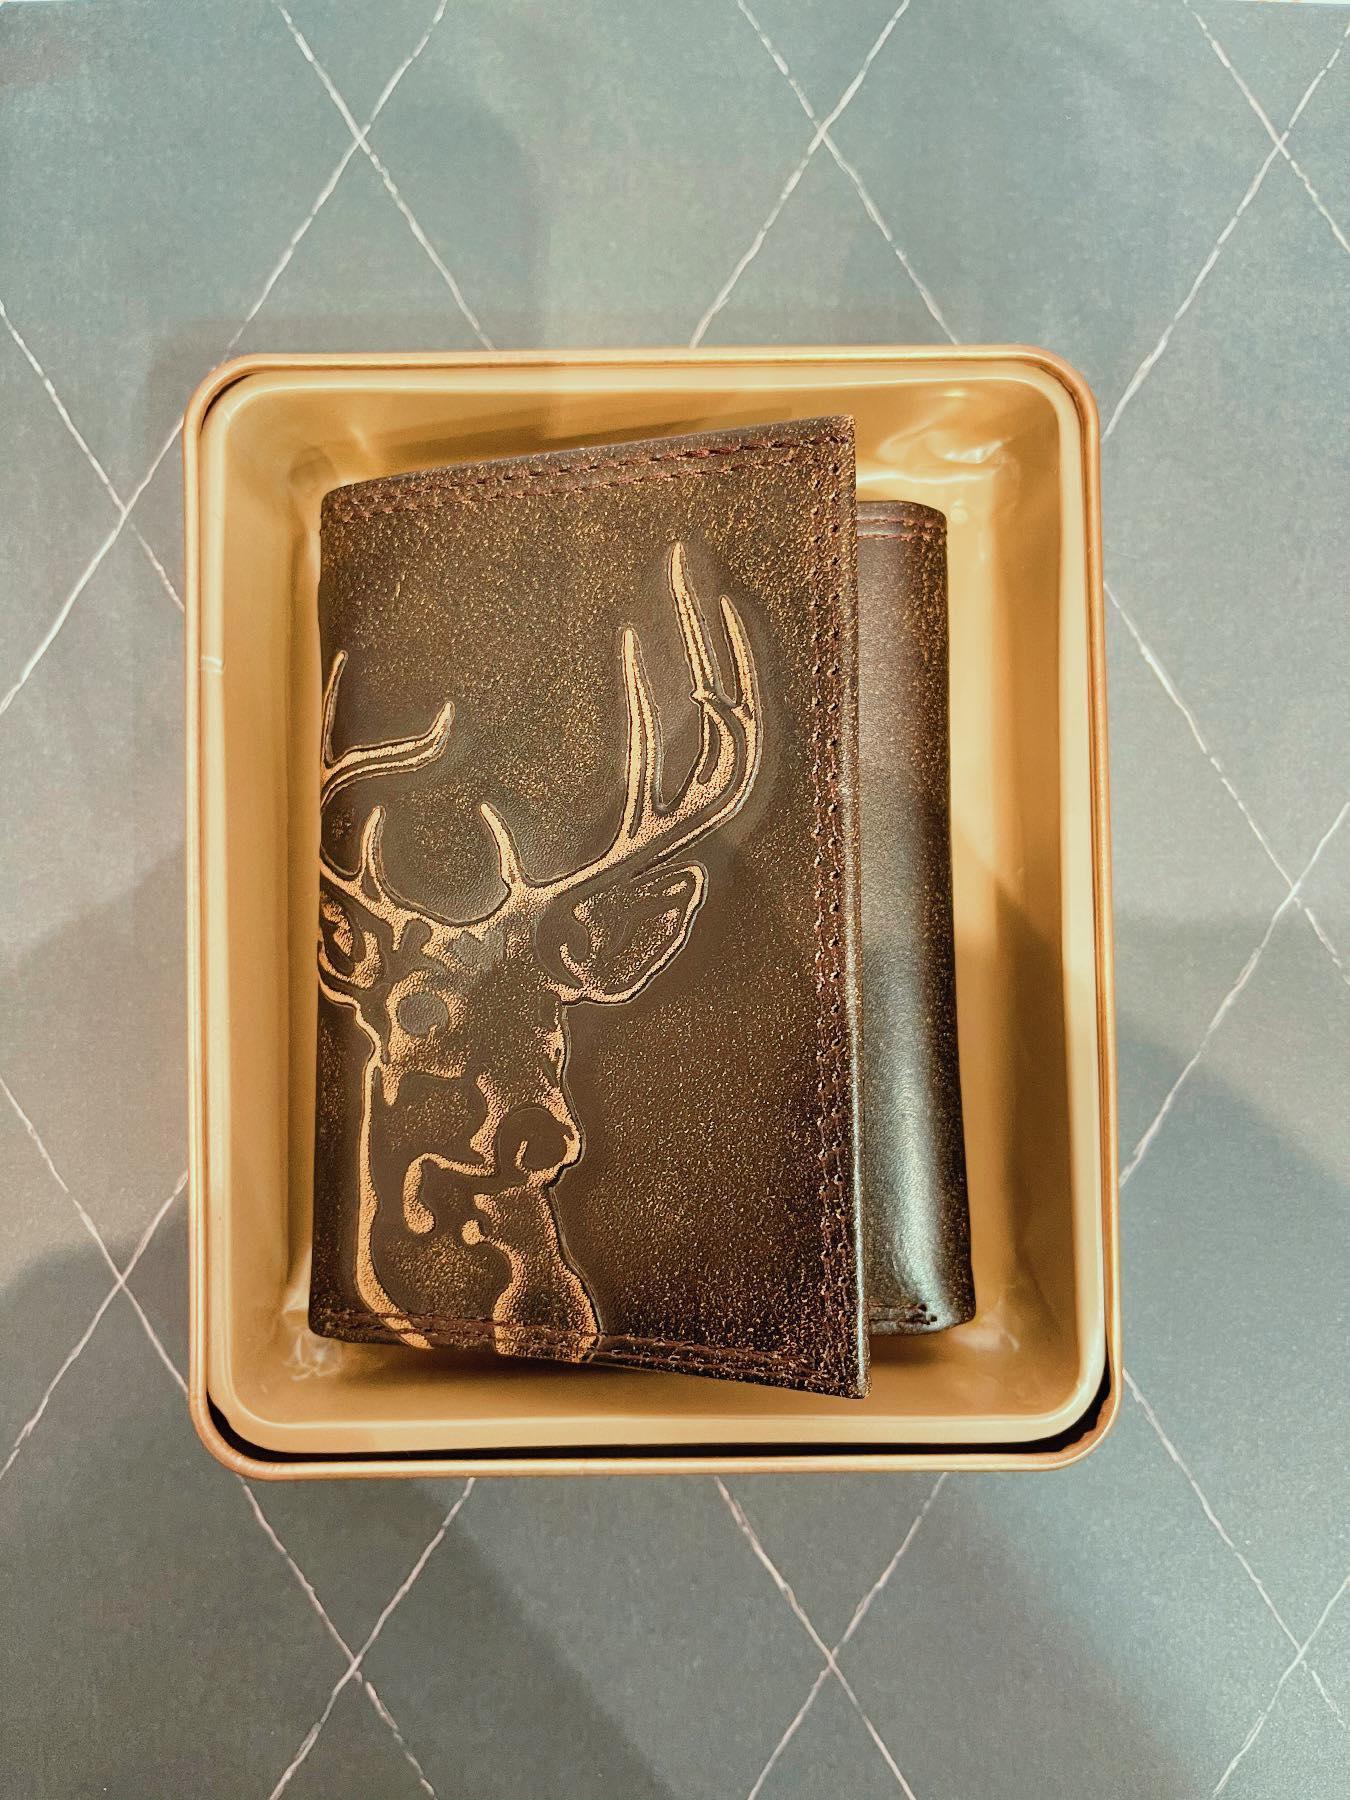 Burnished Leather Trifold Wallet